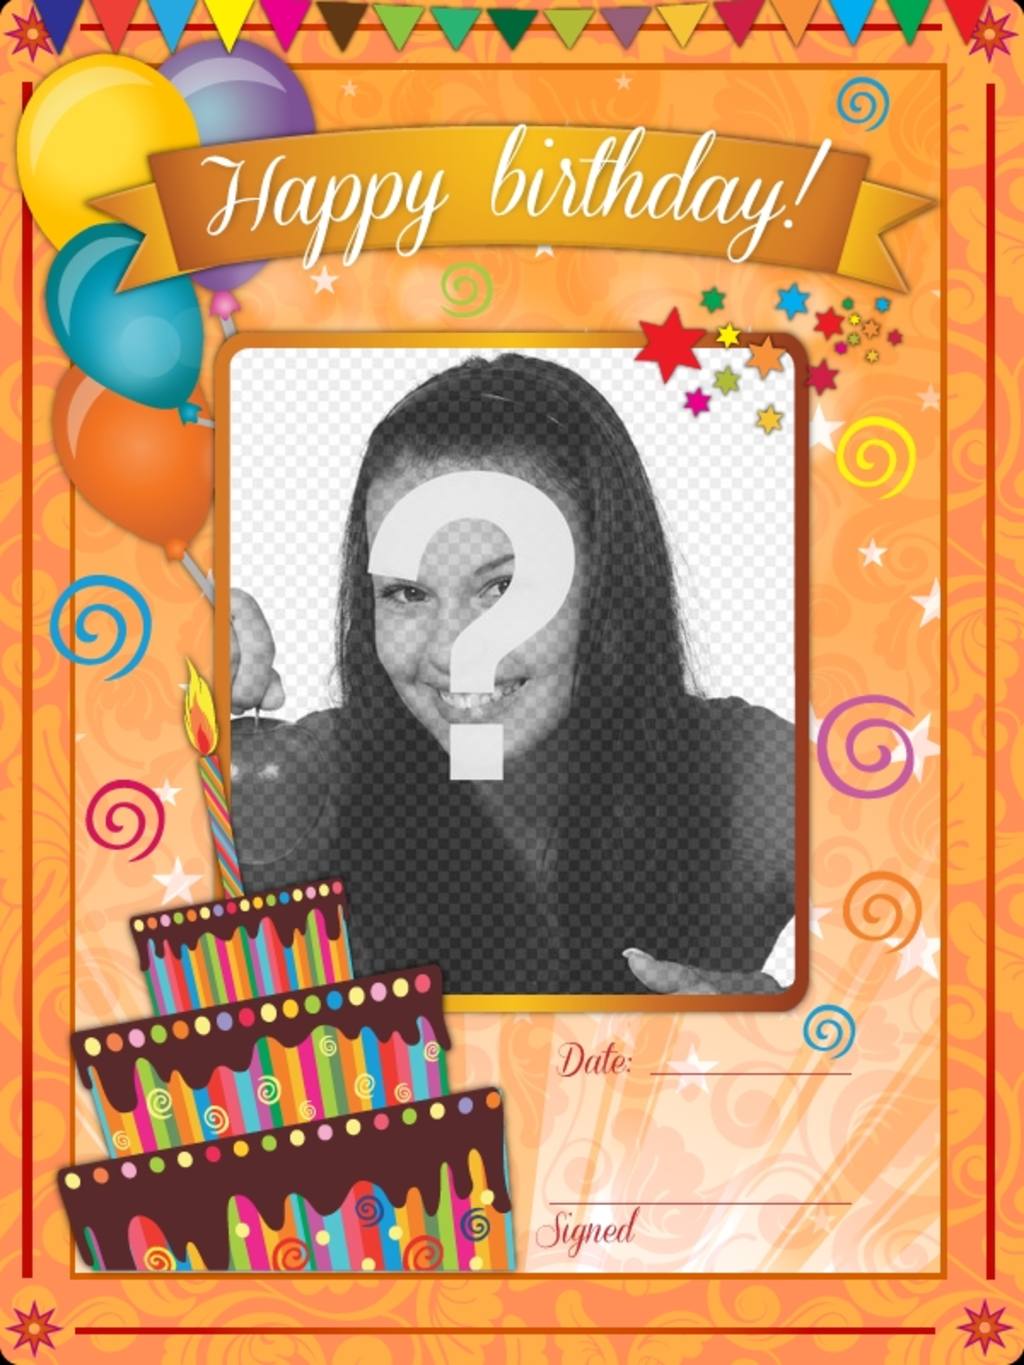 Birthday card with orange background and funny drawings to be customized..